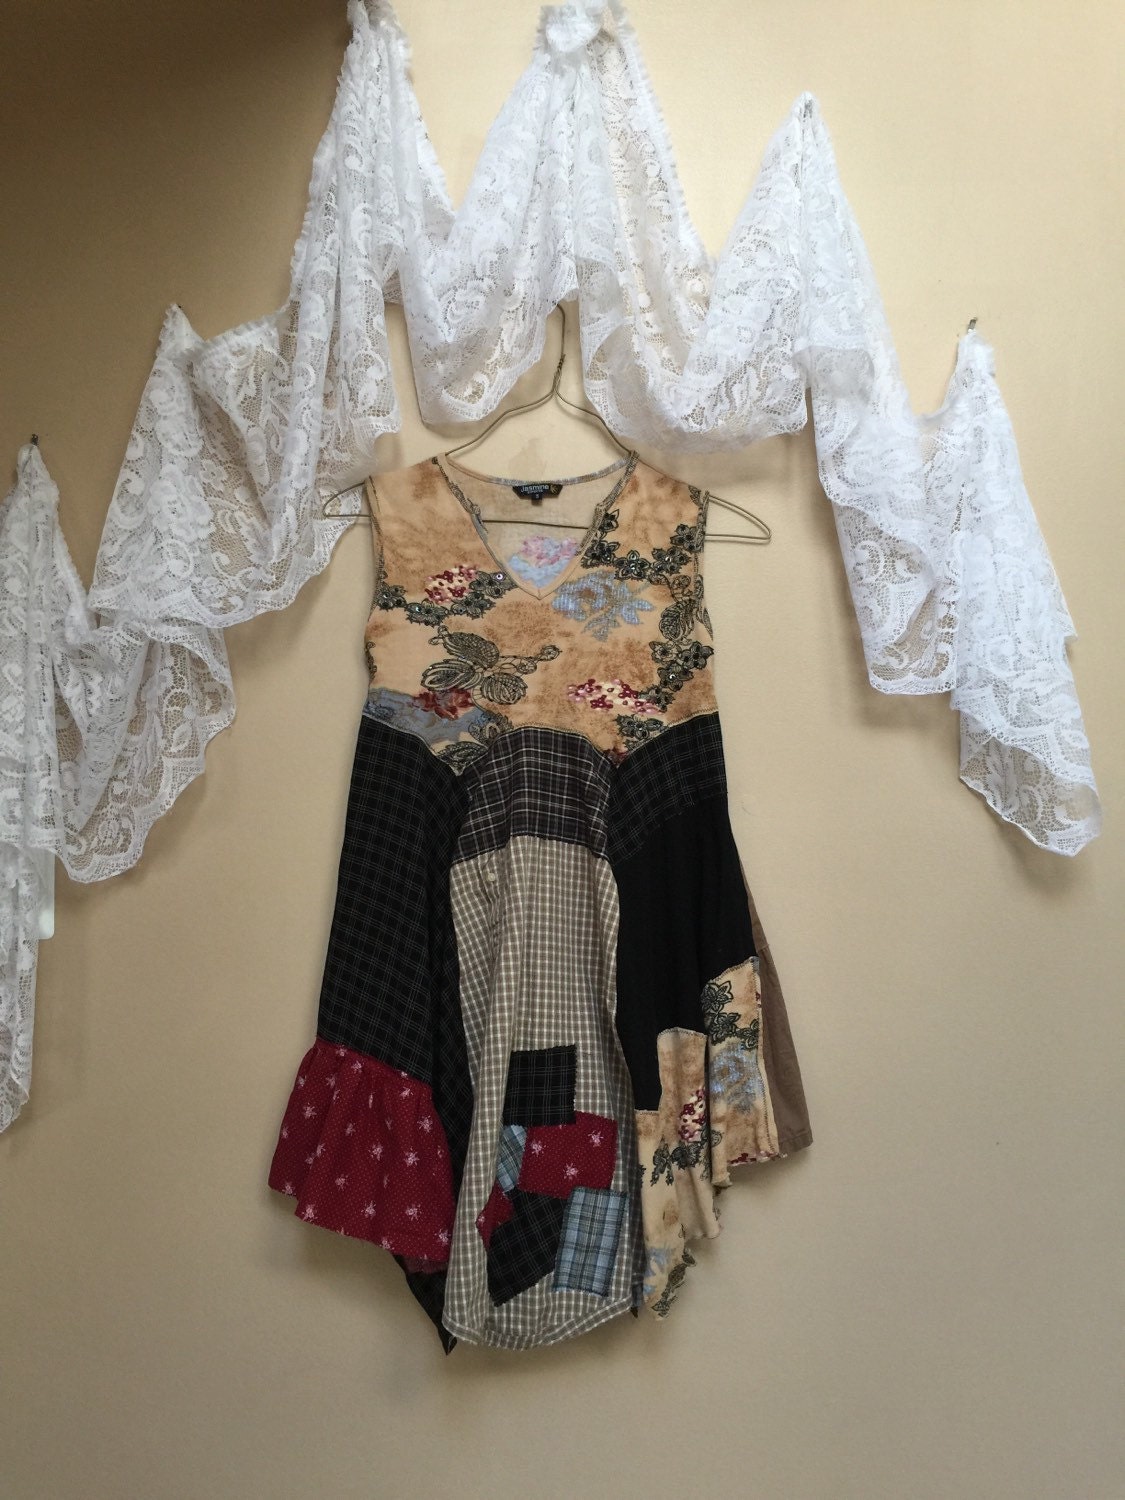 Small / Upcycled bohemian Dress / Patchwork Gypsy by Cathrineann